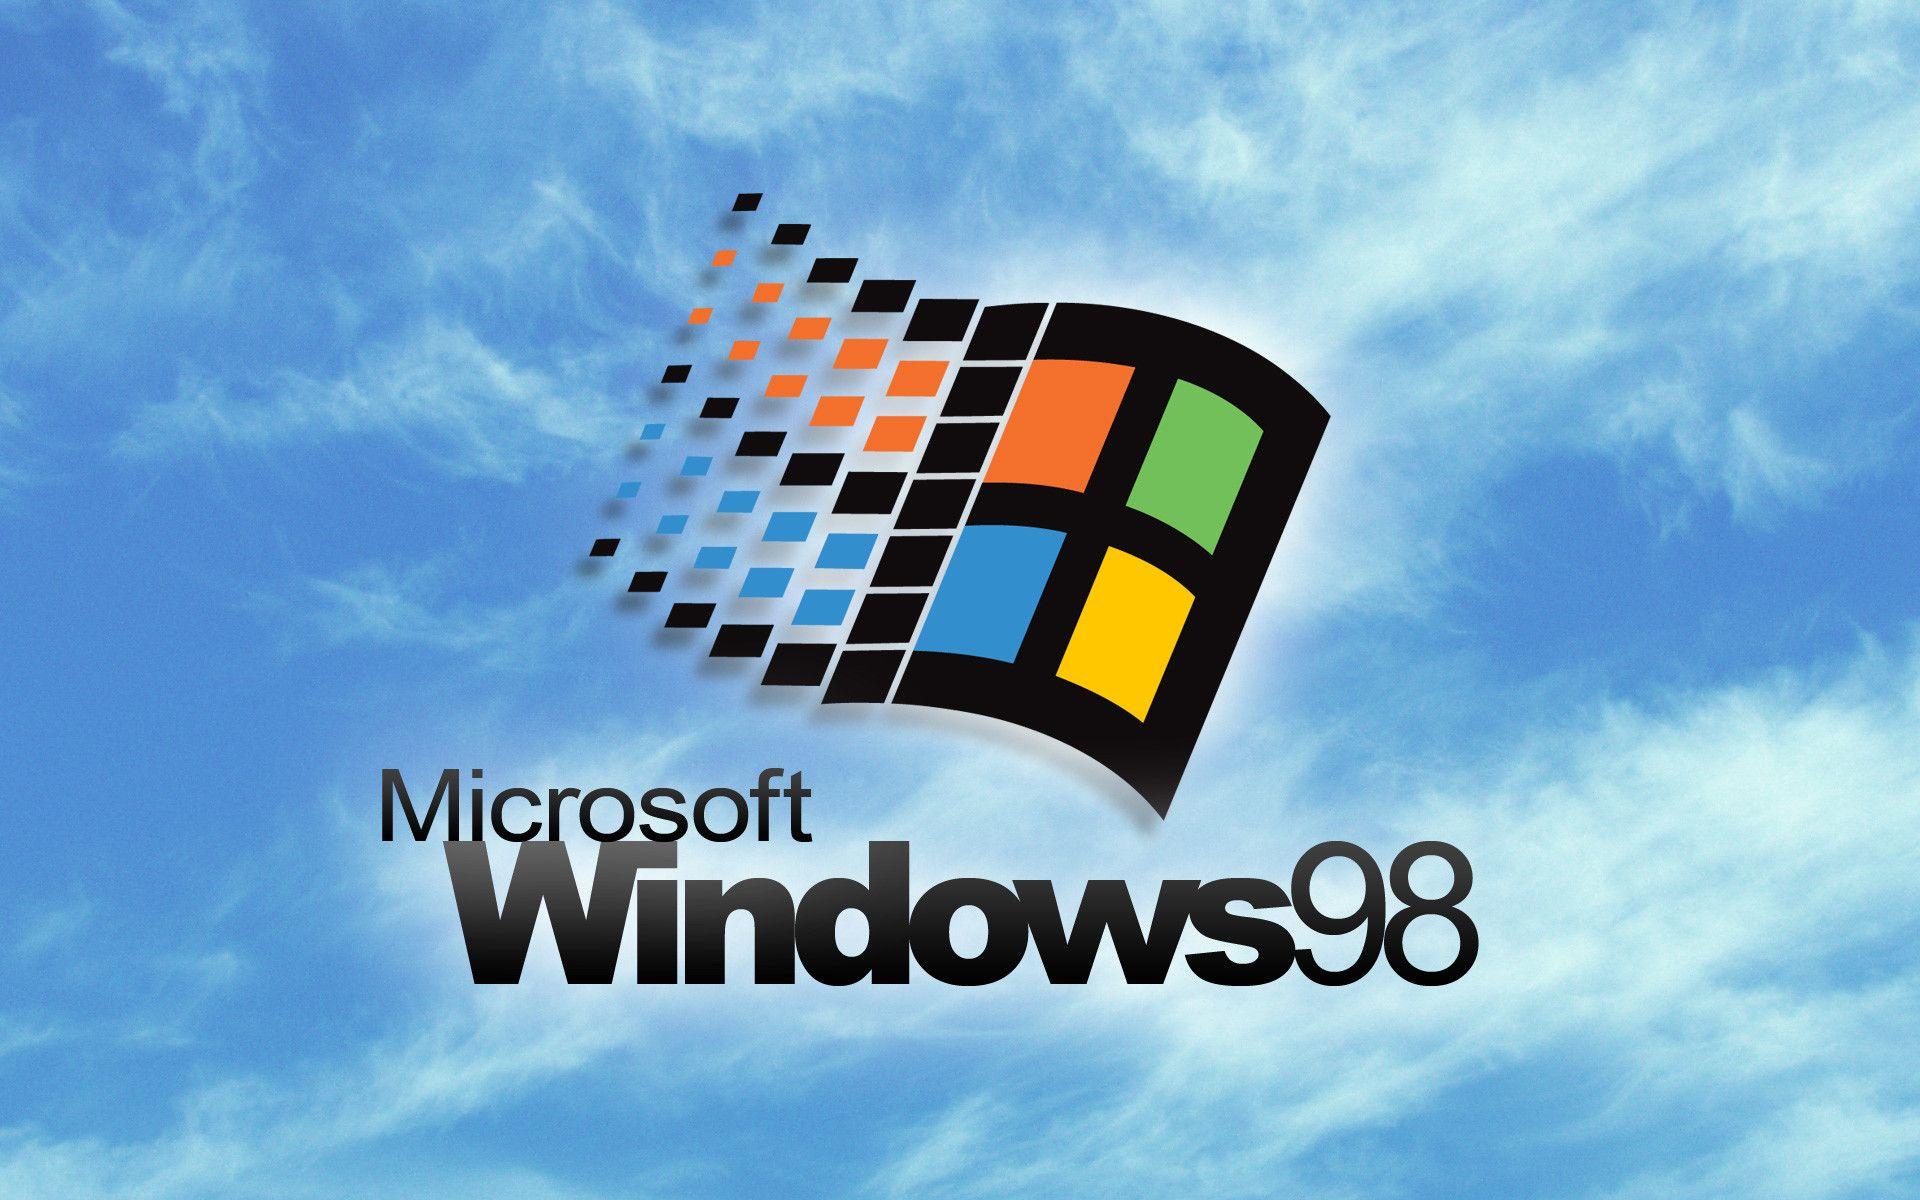 Windows Me Wallpapers Top Free Windows Me Backgrounds Wallpaperaccess